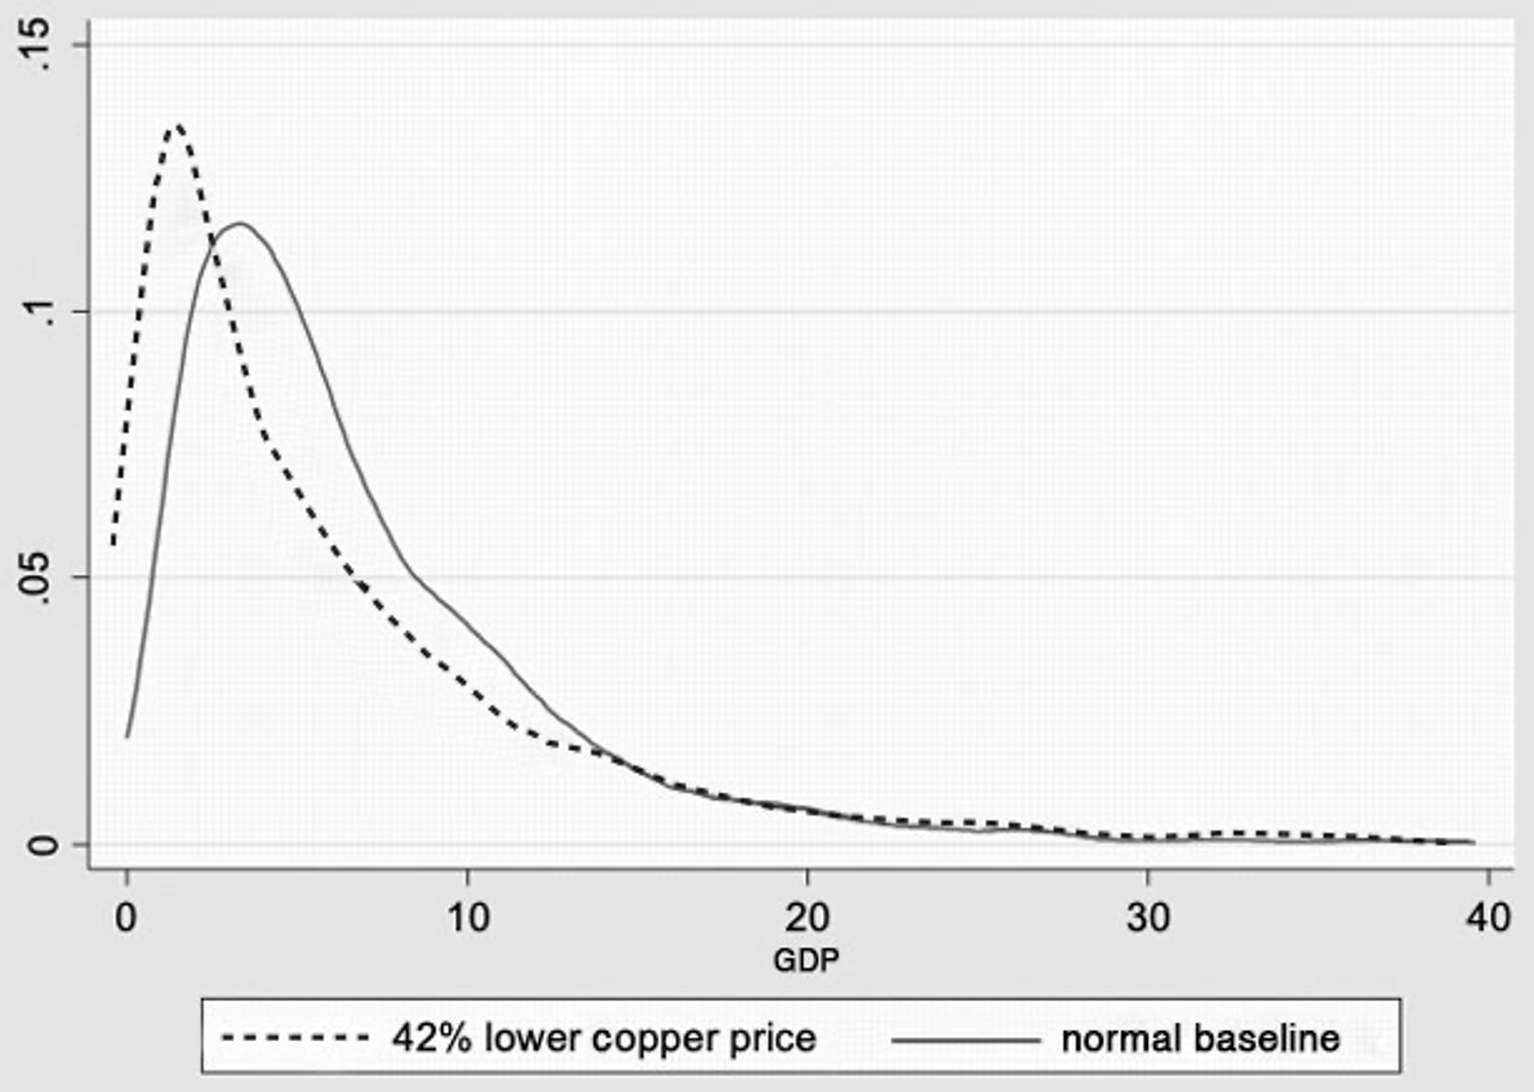 Figure 3 Chile 2005: Impact of a change in the price of copper